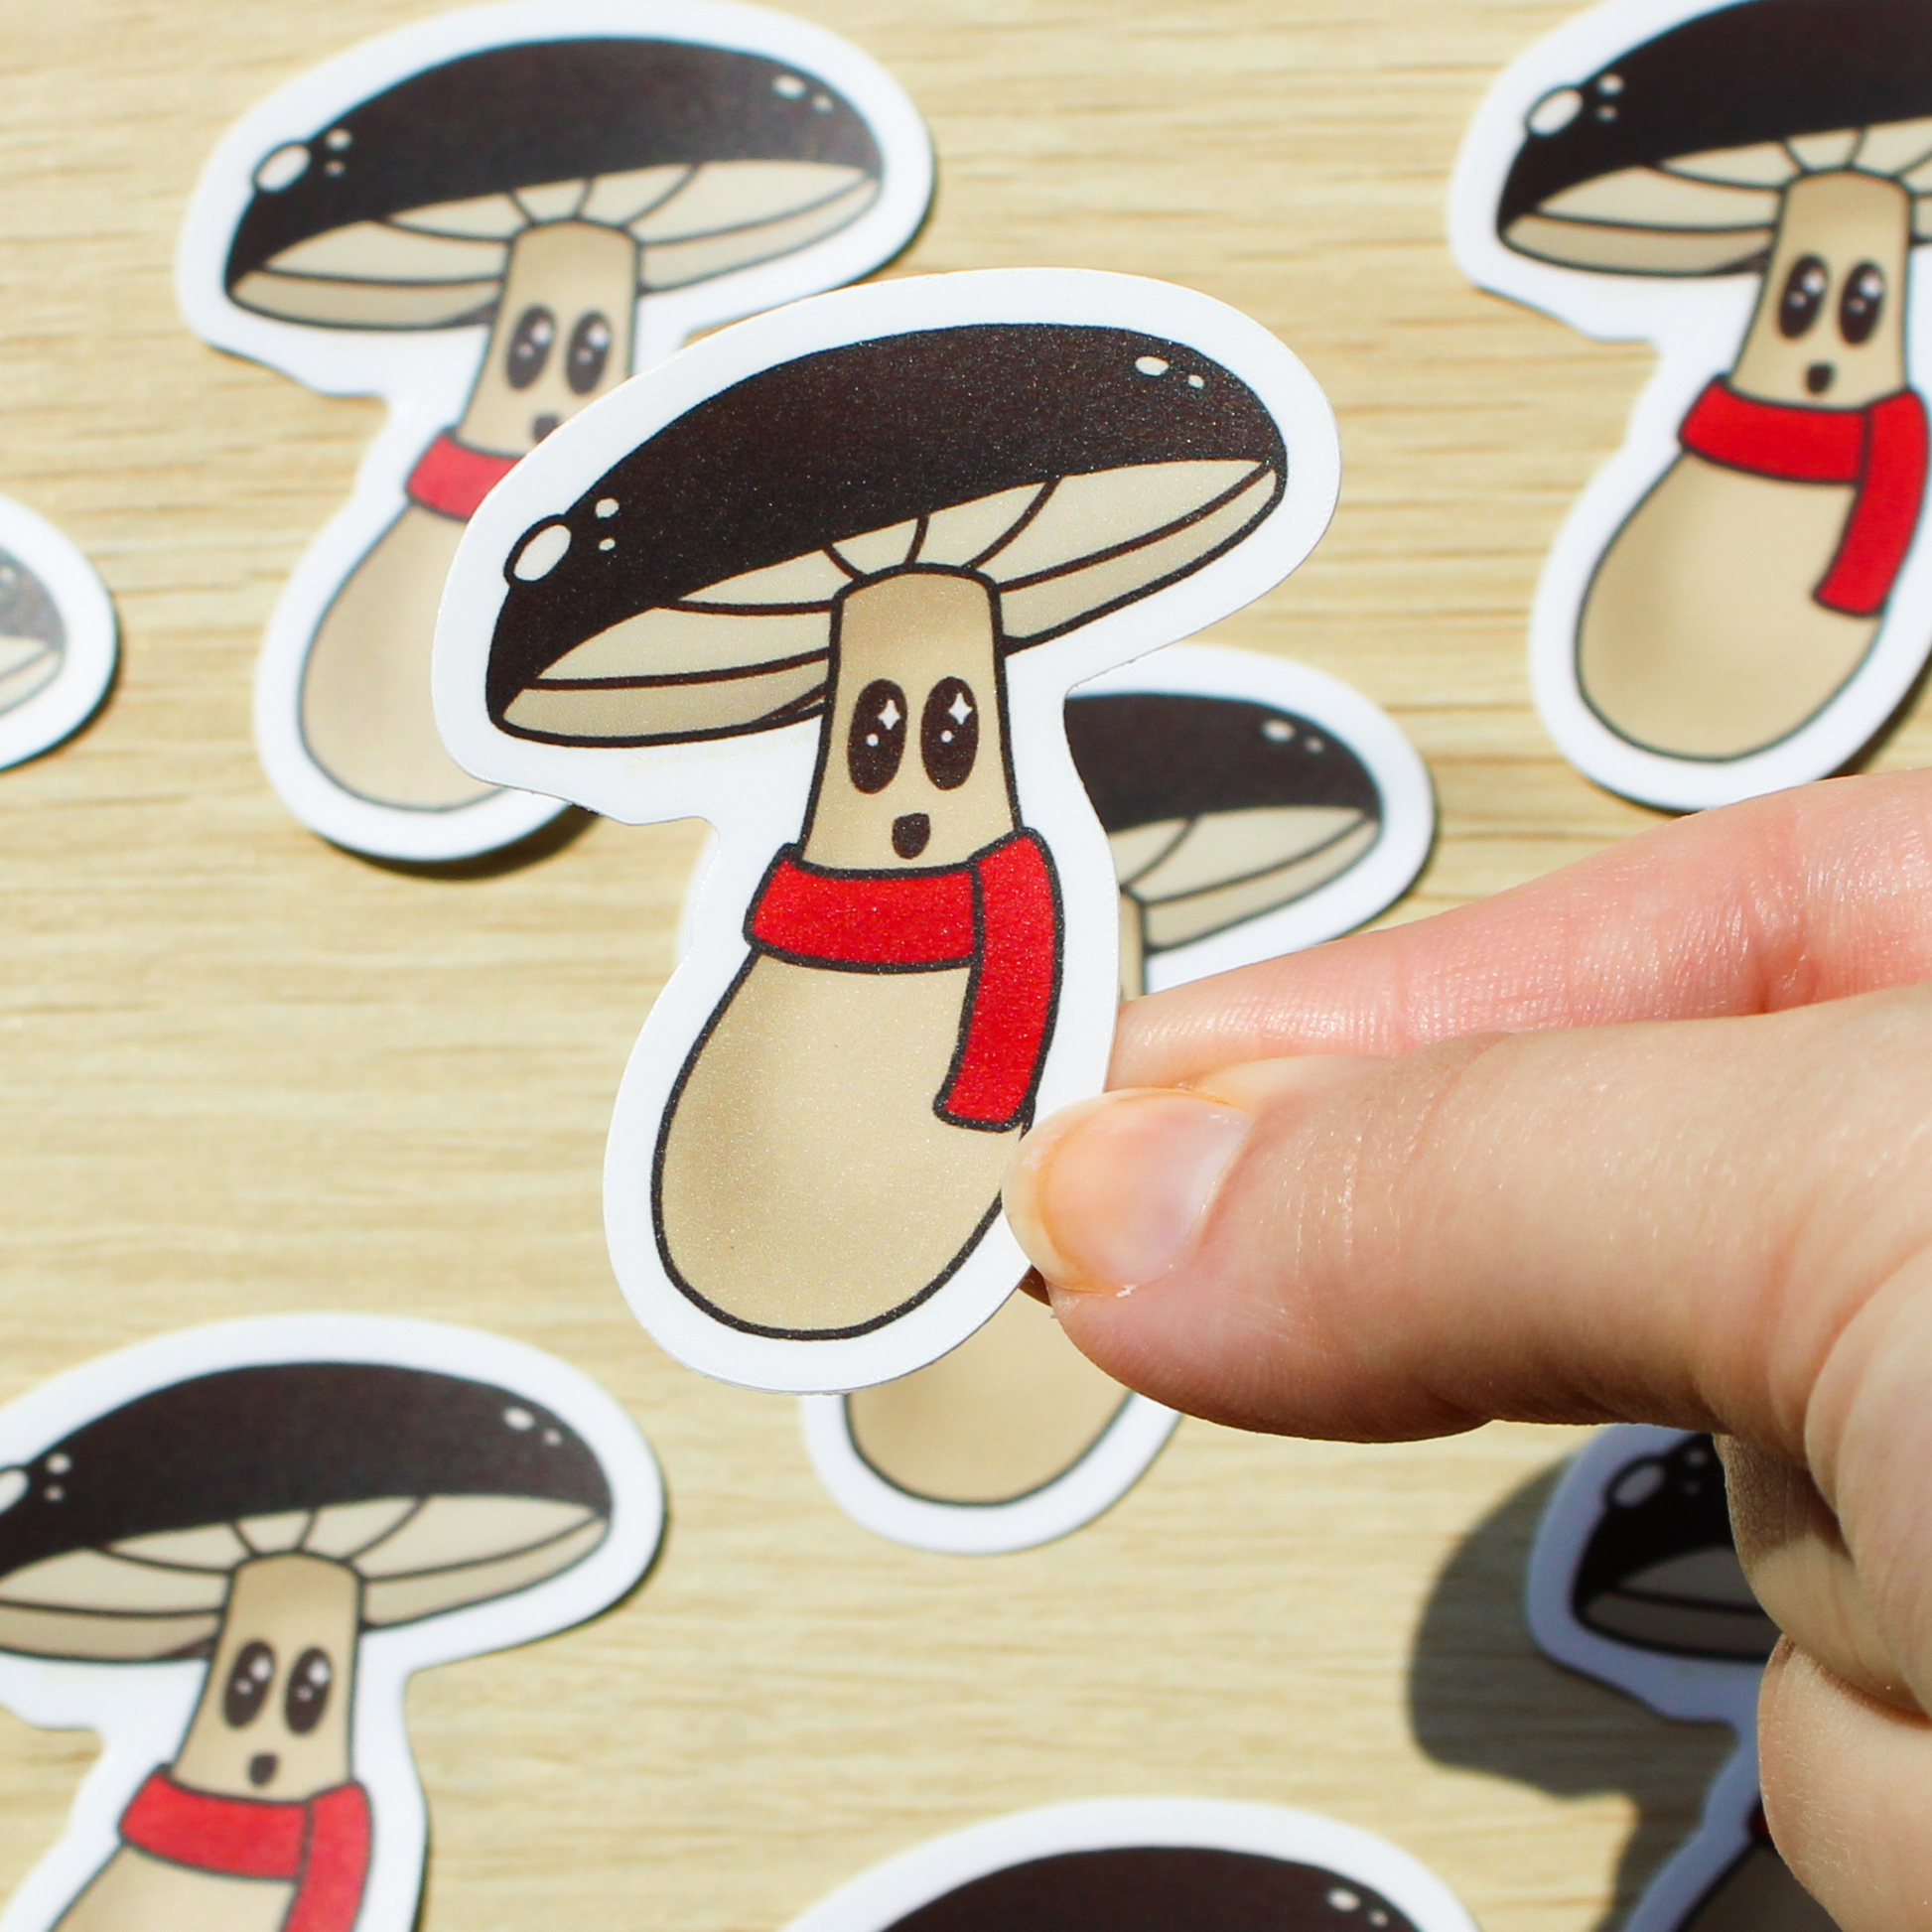 A wooden background with multiple mushroom stickers across it. In the front is a hand holding a mushroom sticker with a brown cap, smiling face, and a red scarf.